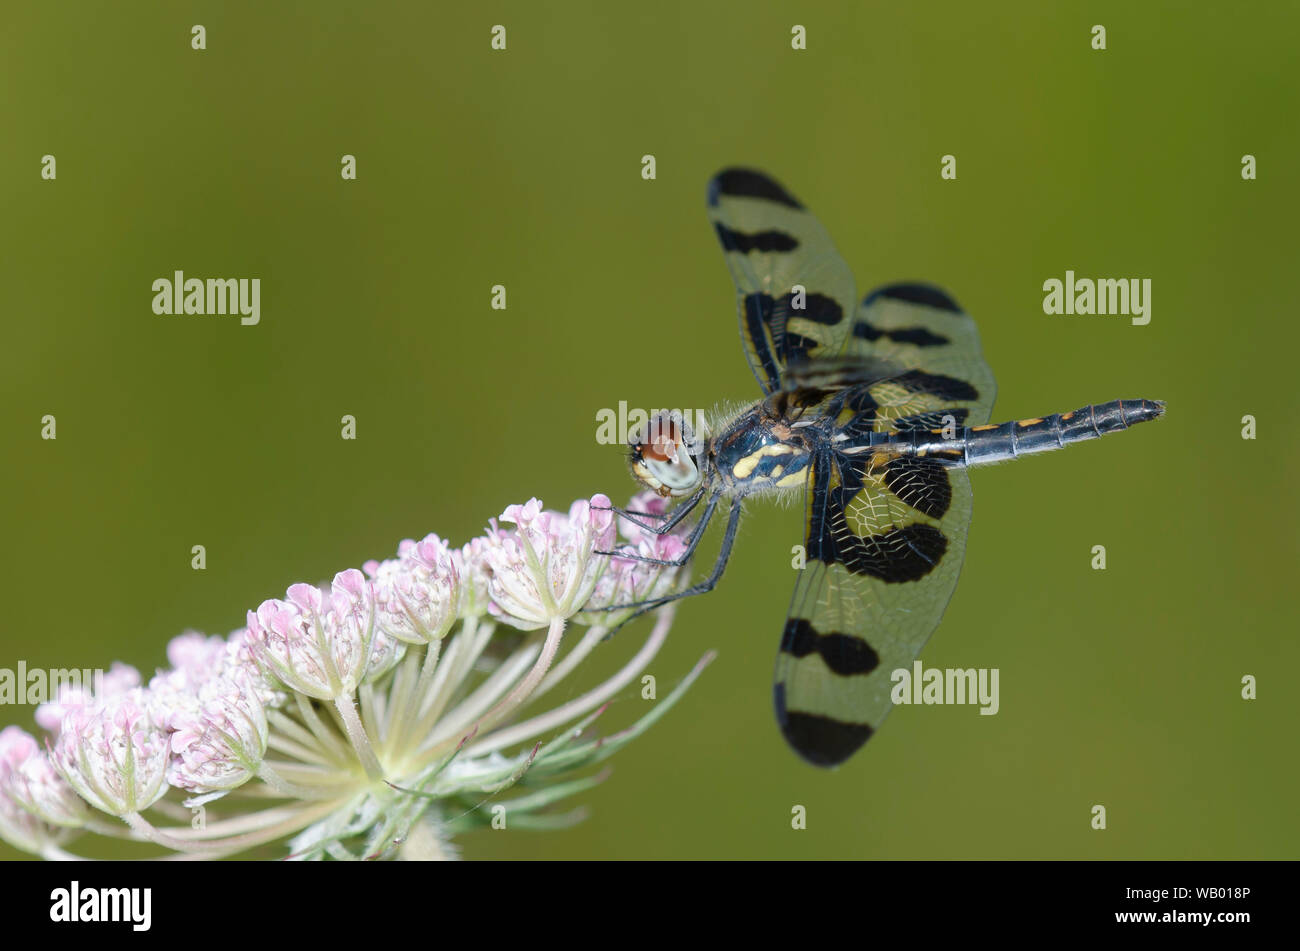 Banded Pennant, Celithemis fasciata, female perched on Queen Anne's Lace, Daucus carota Stock Photo